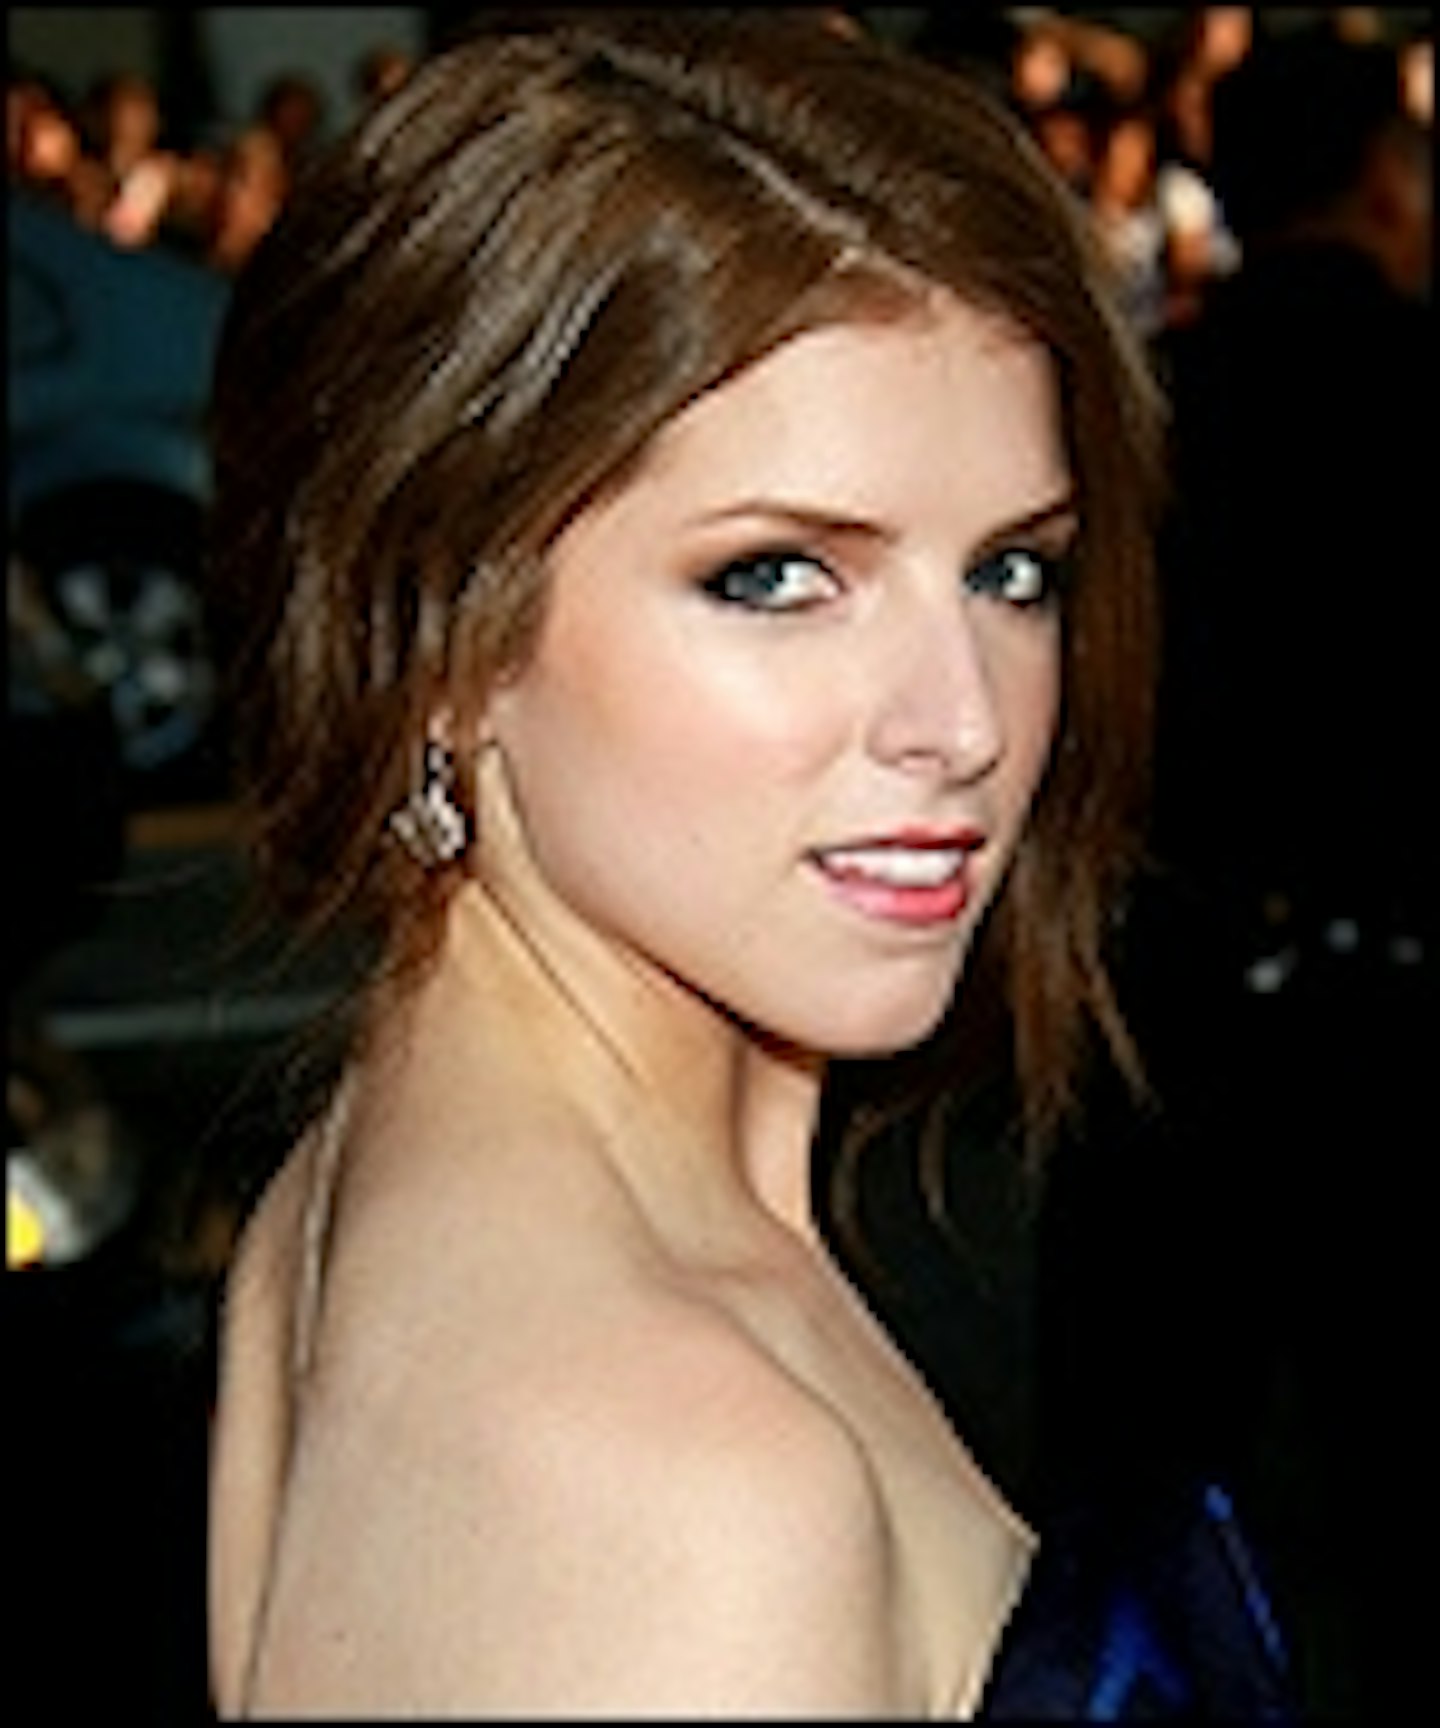 Anna Kendrick In Talks For The Accountant